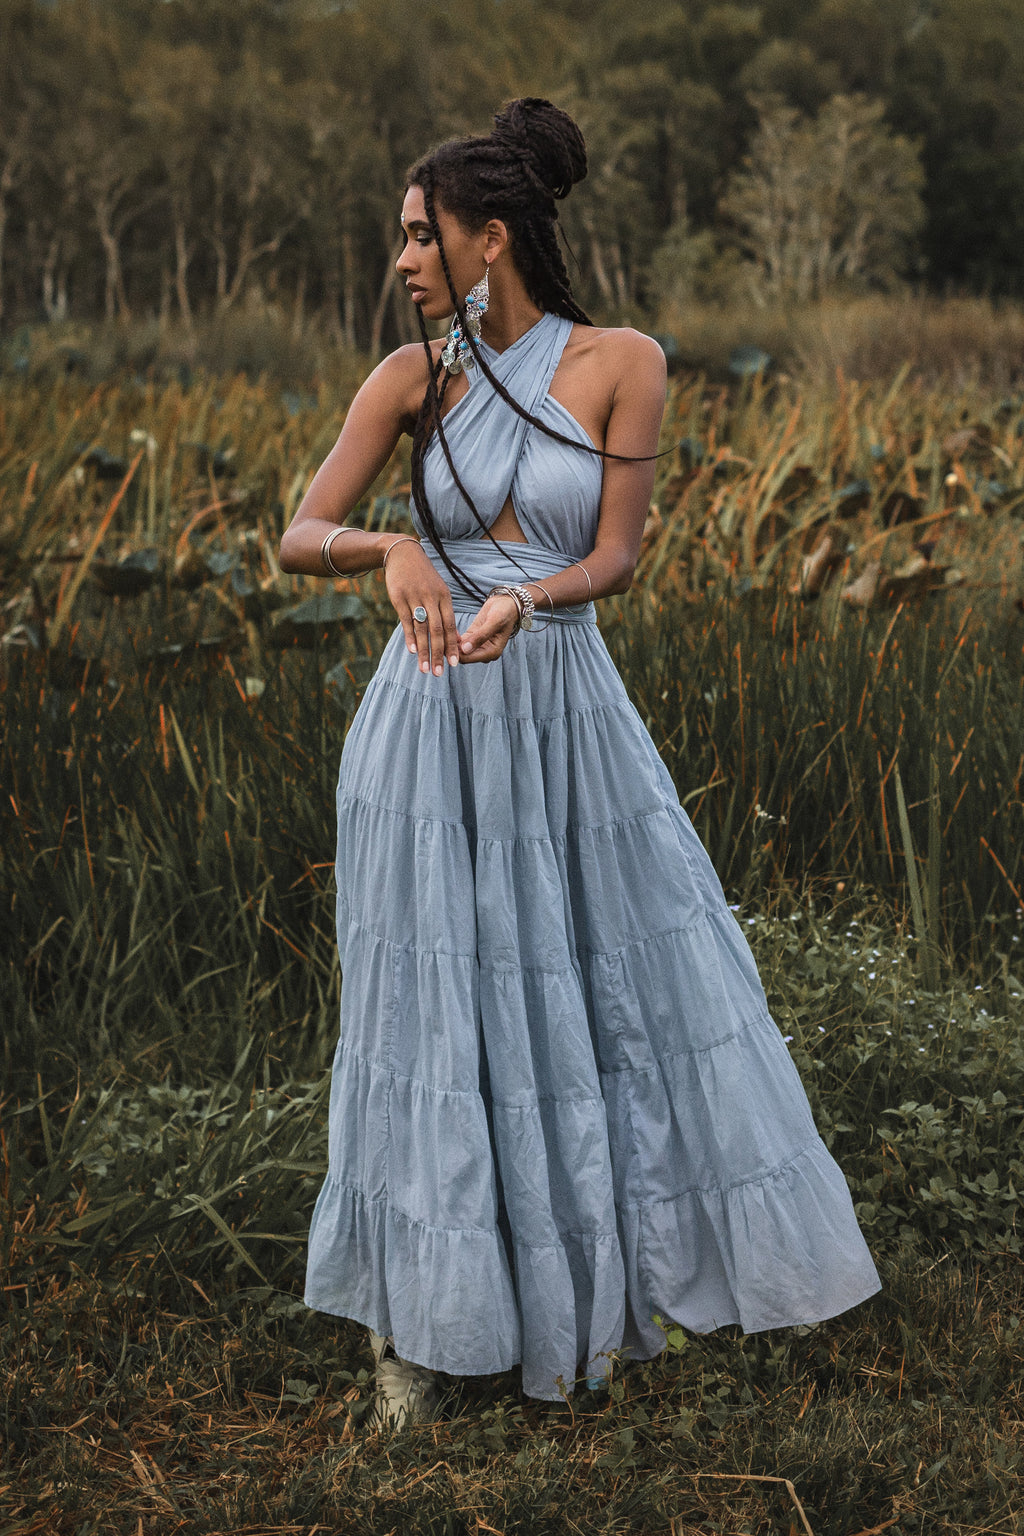 This light blue bohemian dress is perfect for any evening event. The open back and adjustable straps make it both comfortable and stylish.